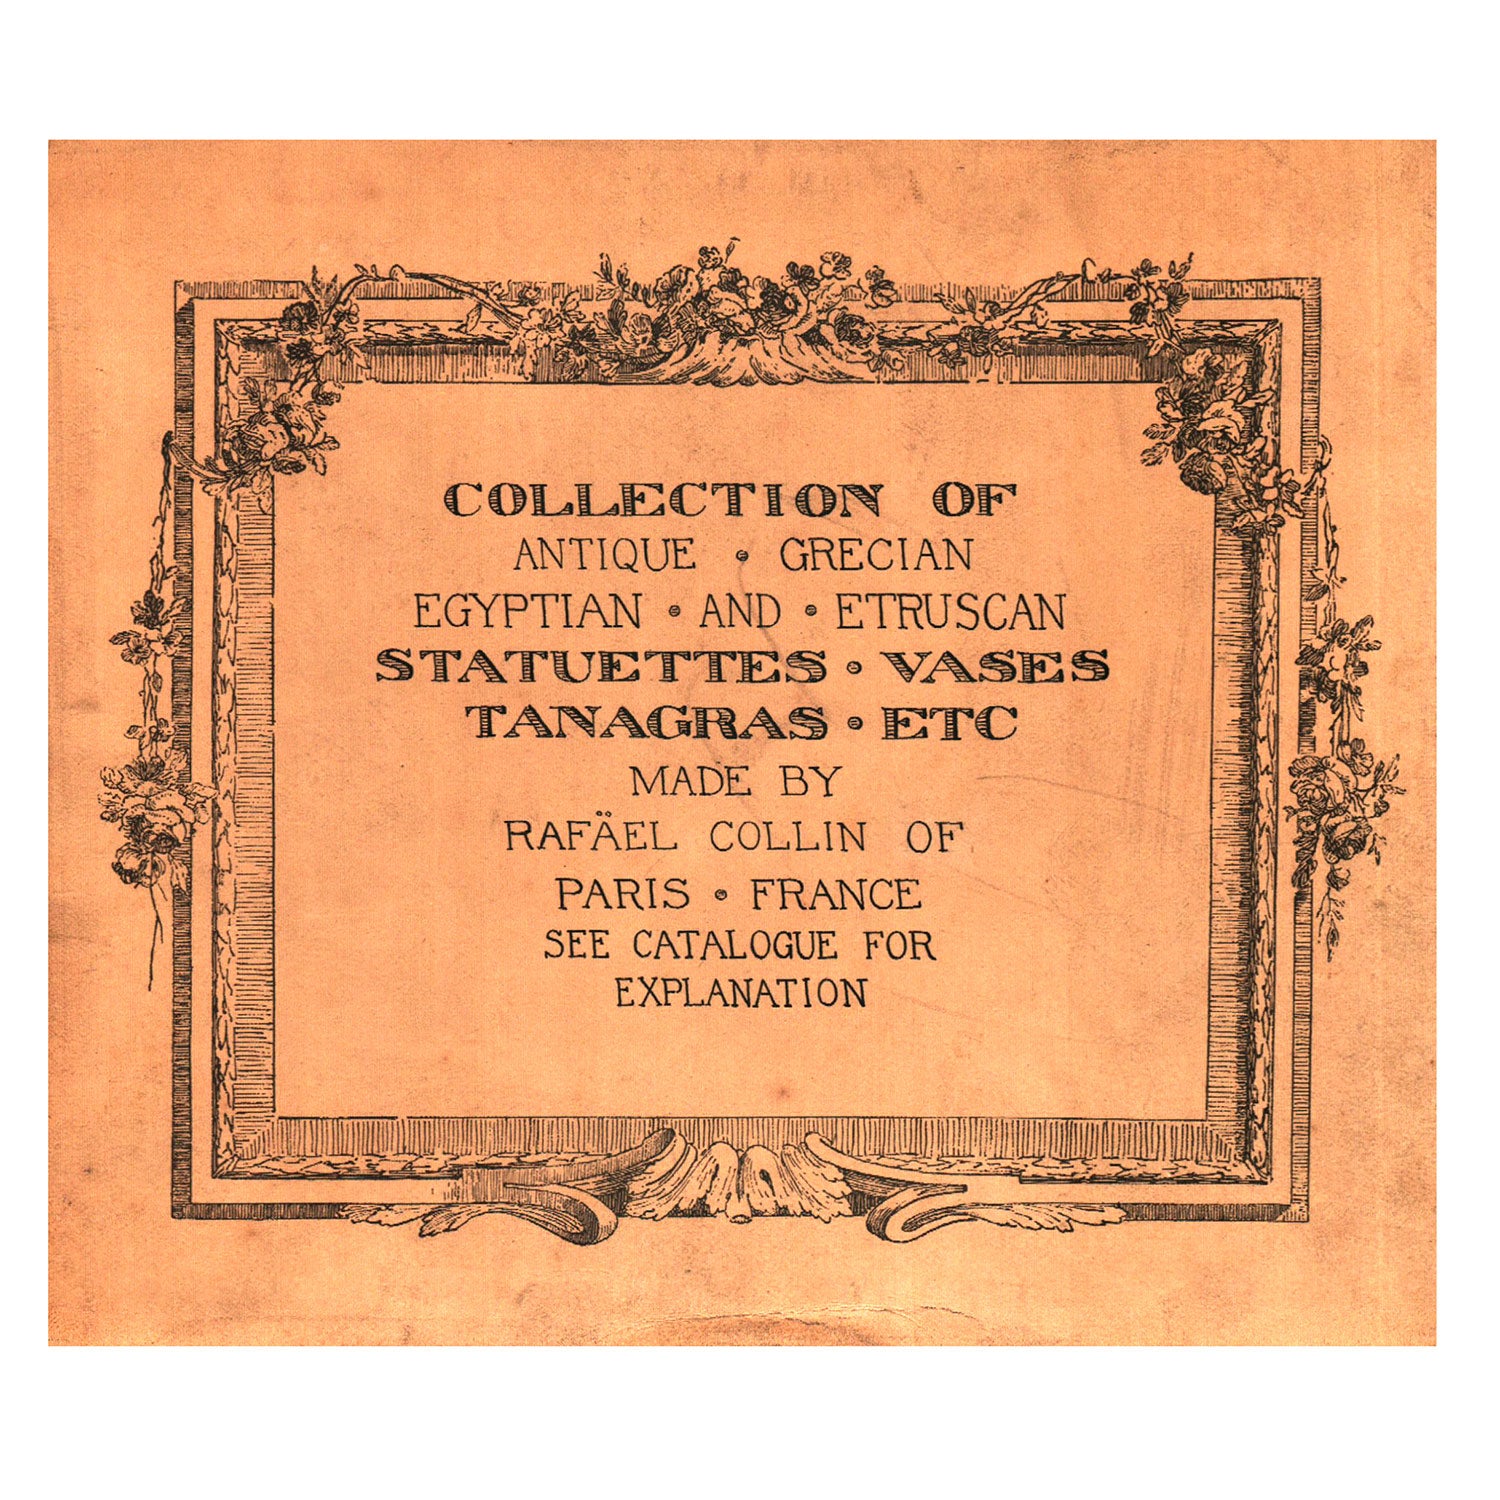 Raphael Collin (1911) Collection of Antique Grecian, Egyptian and Etruscan Statuettes, Vases, Tanagras, etc